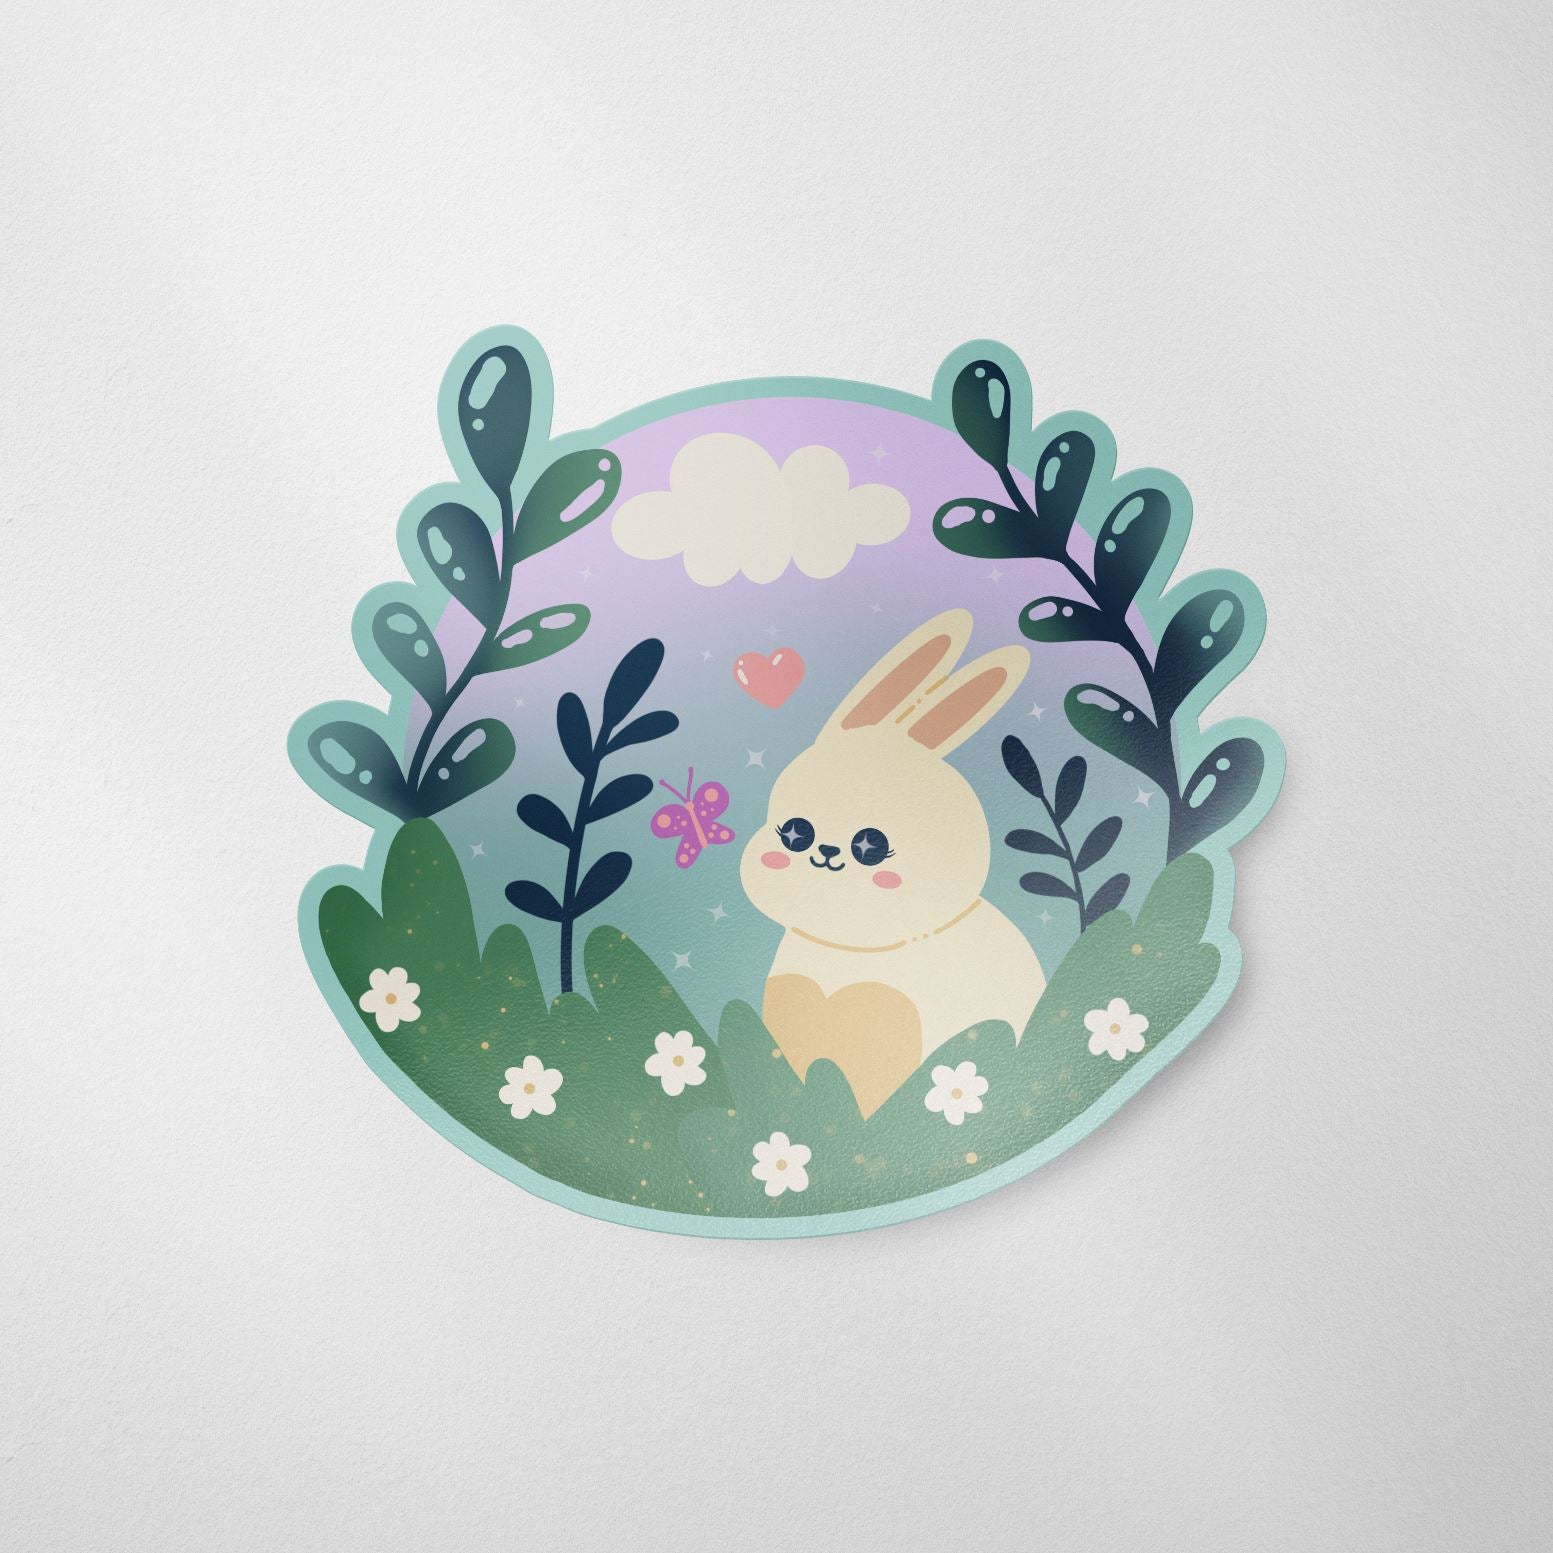 A hand-drawn matte die cut vinyl sticker featuring a cute Kawaii bunny sitting in a meadow surrounded by leaves, flowers, a pink butterfly, a heart, and a cloud in the background.